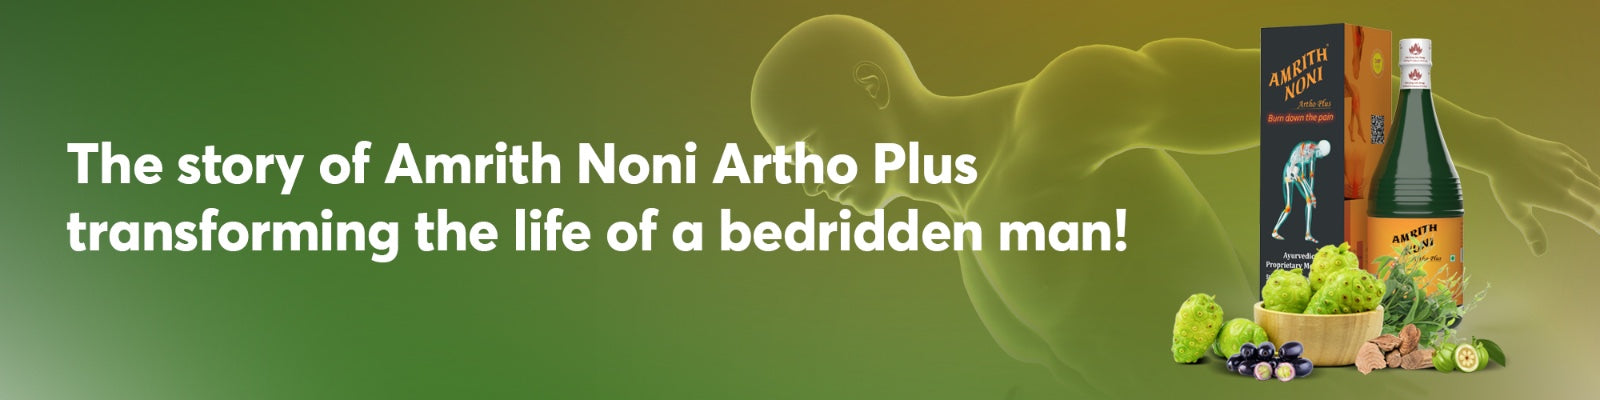 The Story Of Amrith Noni Artho Plus Transforming The Life Of a Bedridden Man!